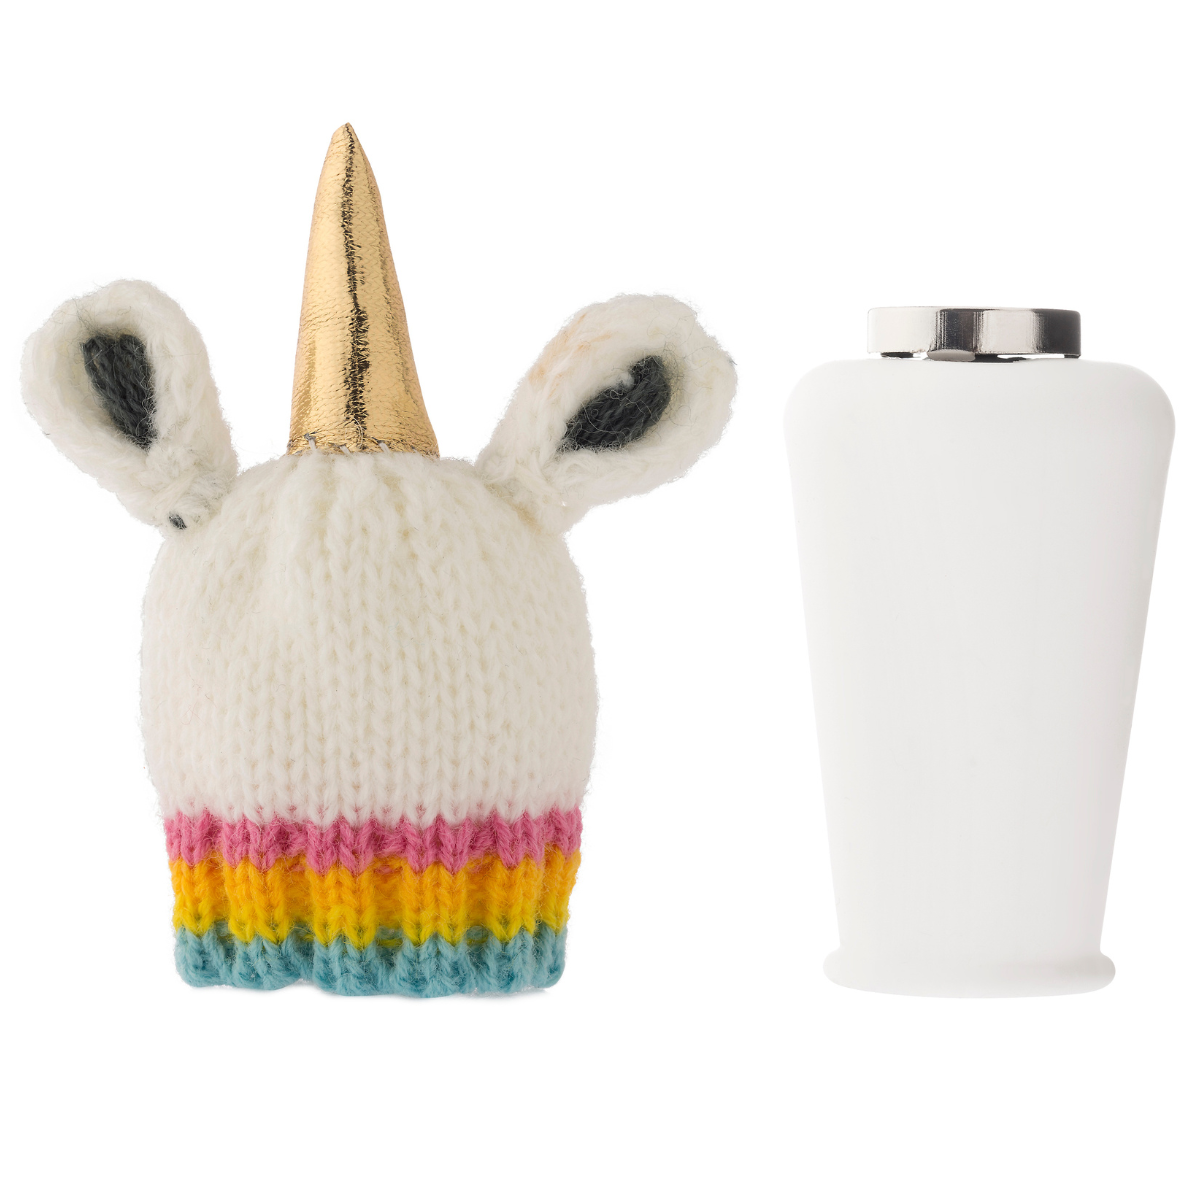 Unicorn Nana Hat | Includes Standard Size BPA-Free Silicone Cap with Magnet